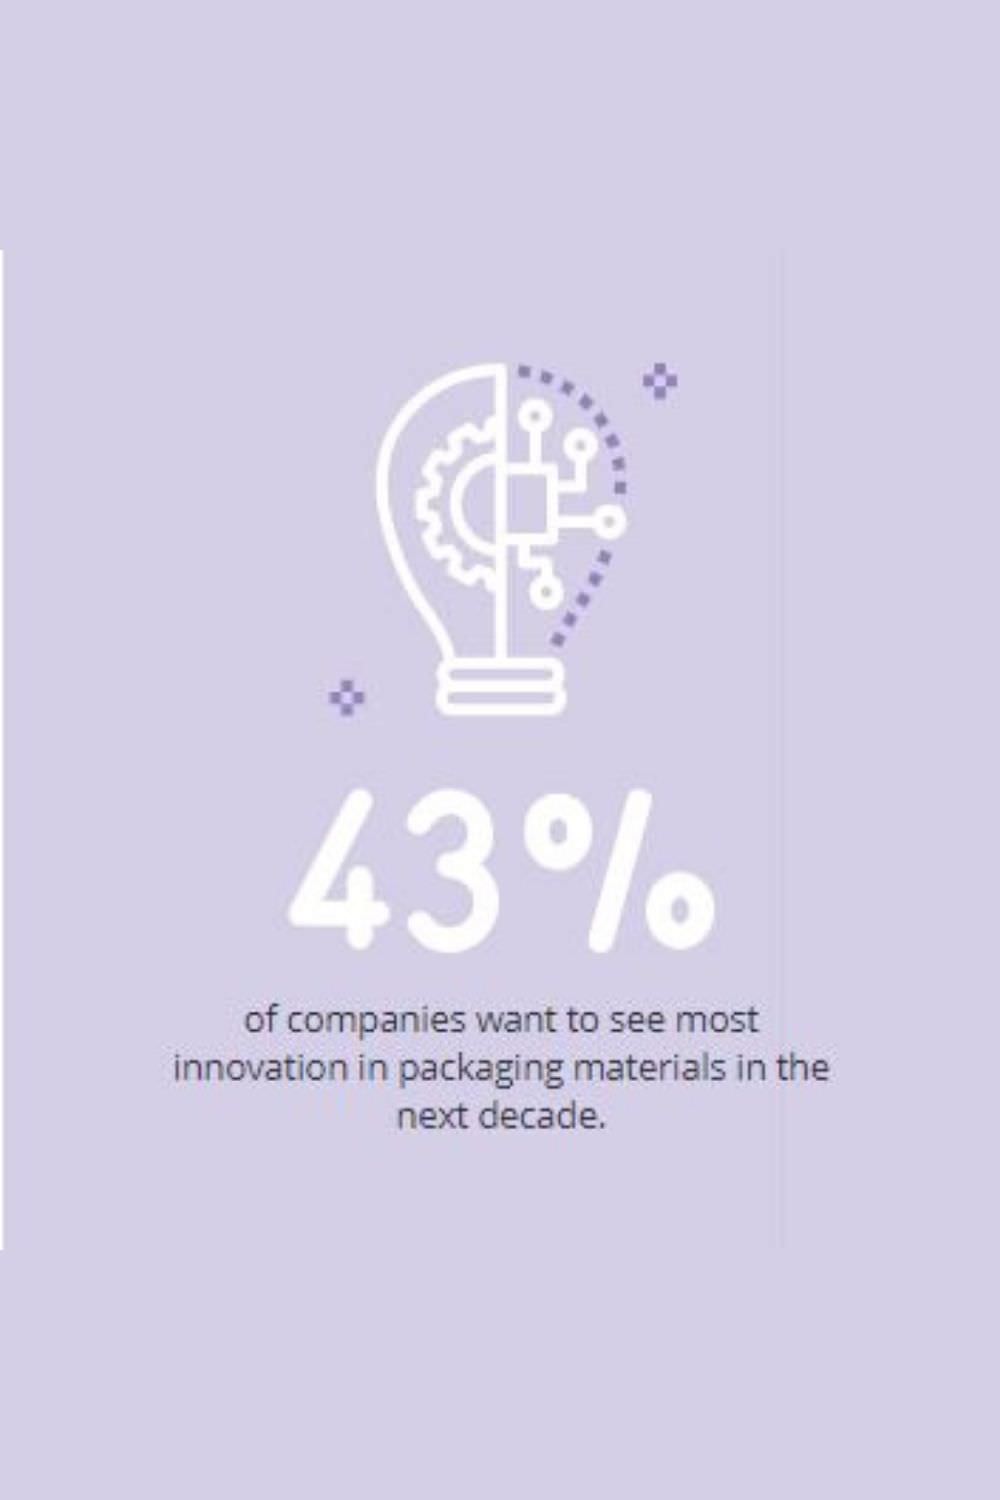 Light Bulb with statistic 43% of companies want to see more innovation in packaging materials in the next decade